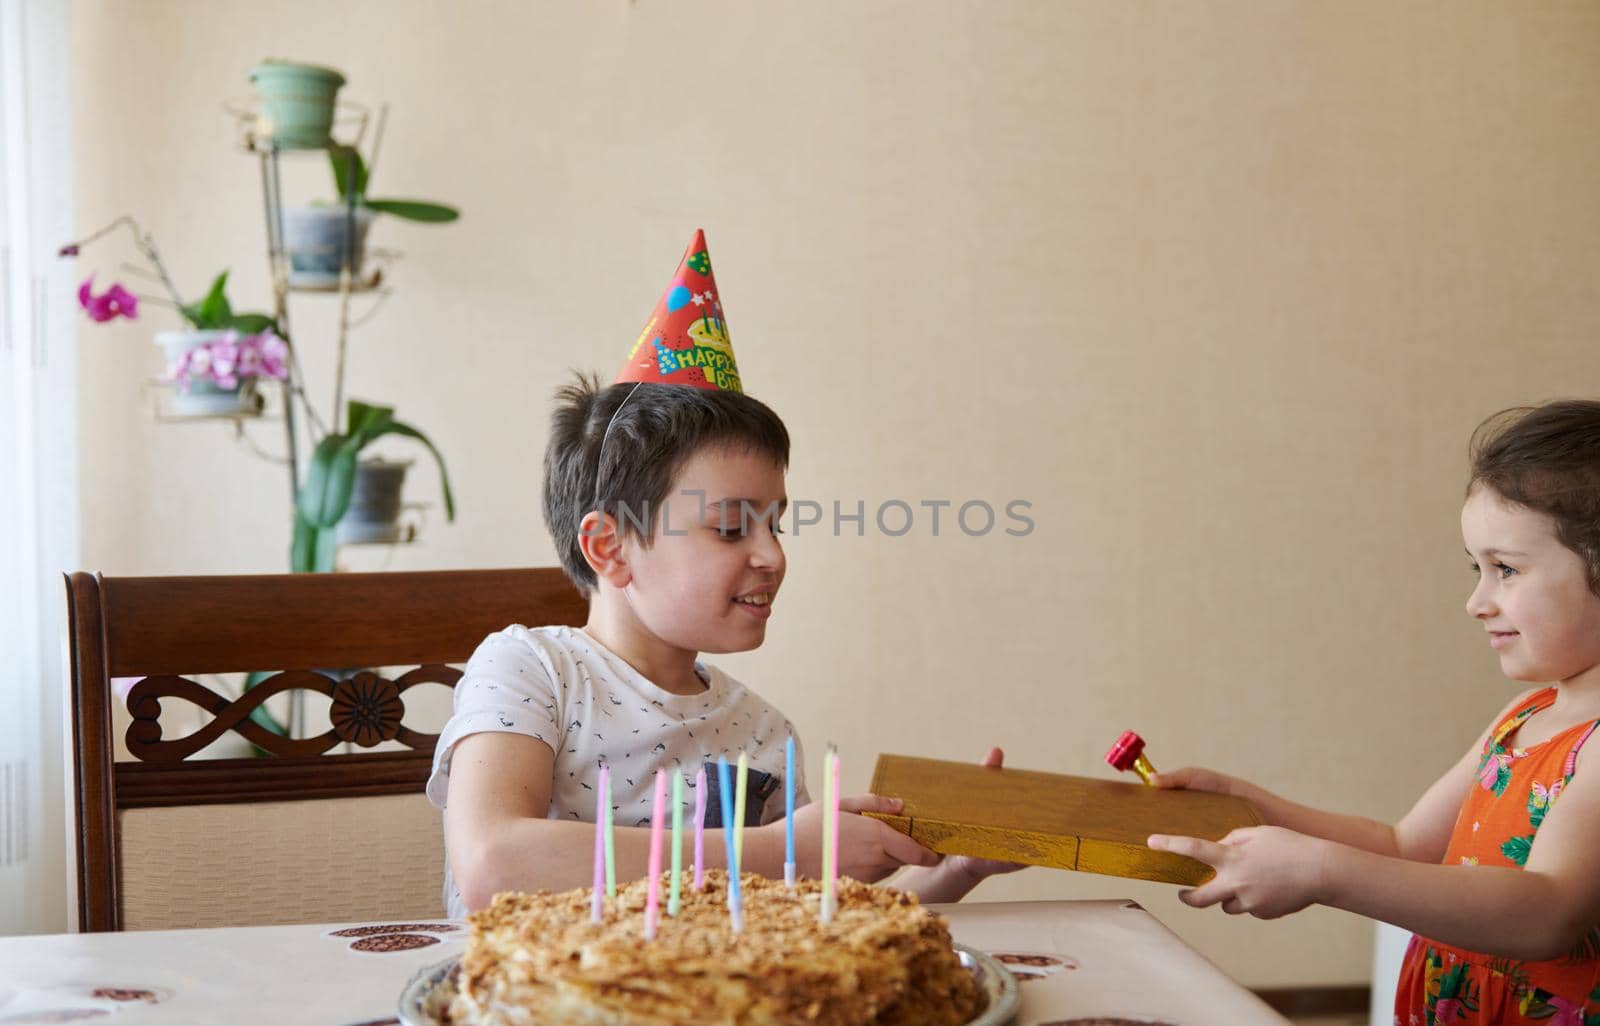 Charming Caucasian boy receives a gift from his younger sister for his 10th birthday, sits at the table with a birthday cake and candles. Birthday, anniversary and event celebration concept by artgf